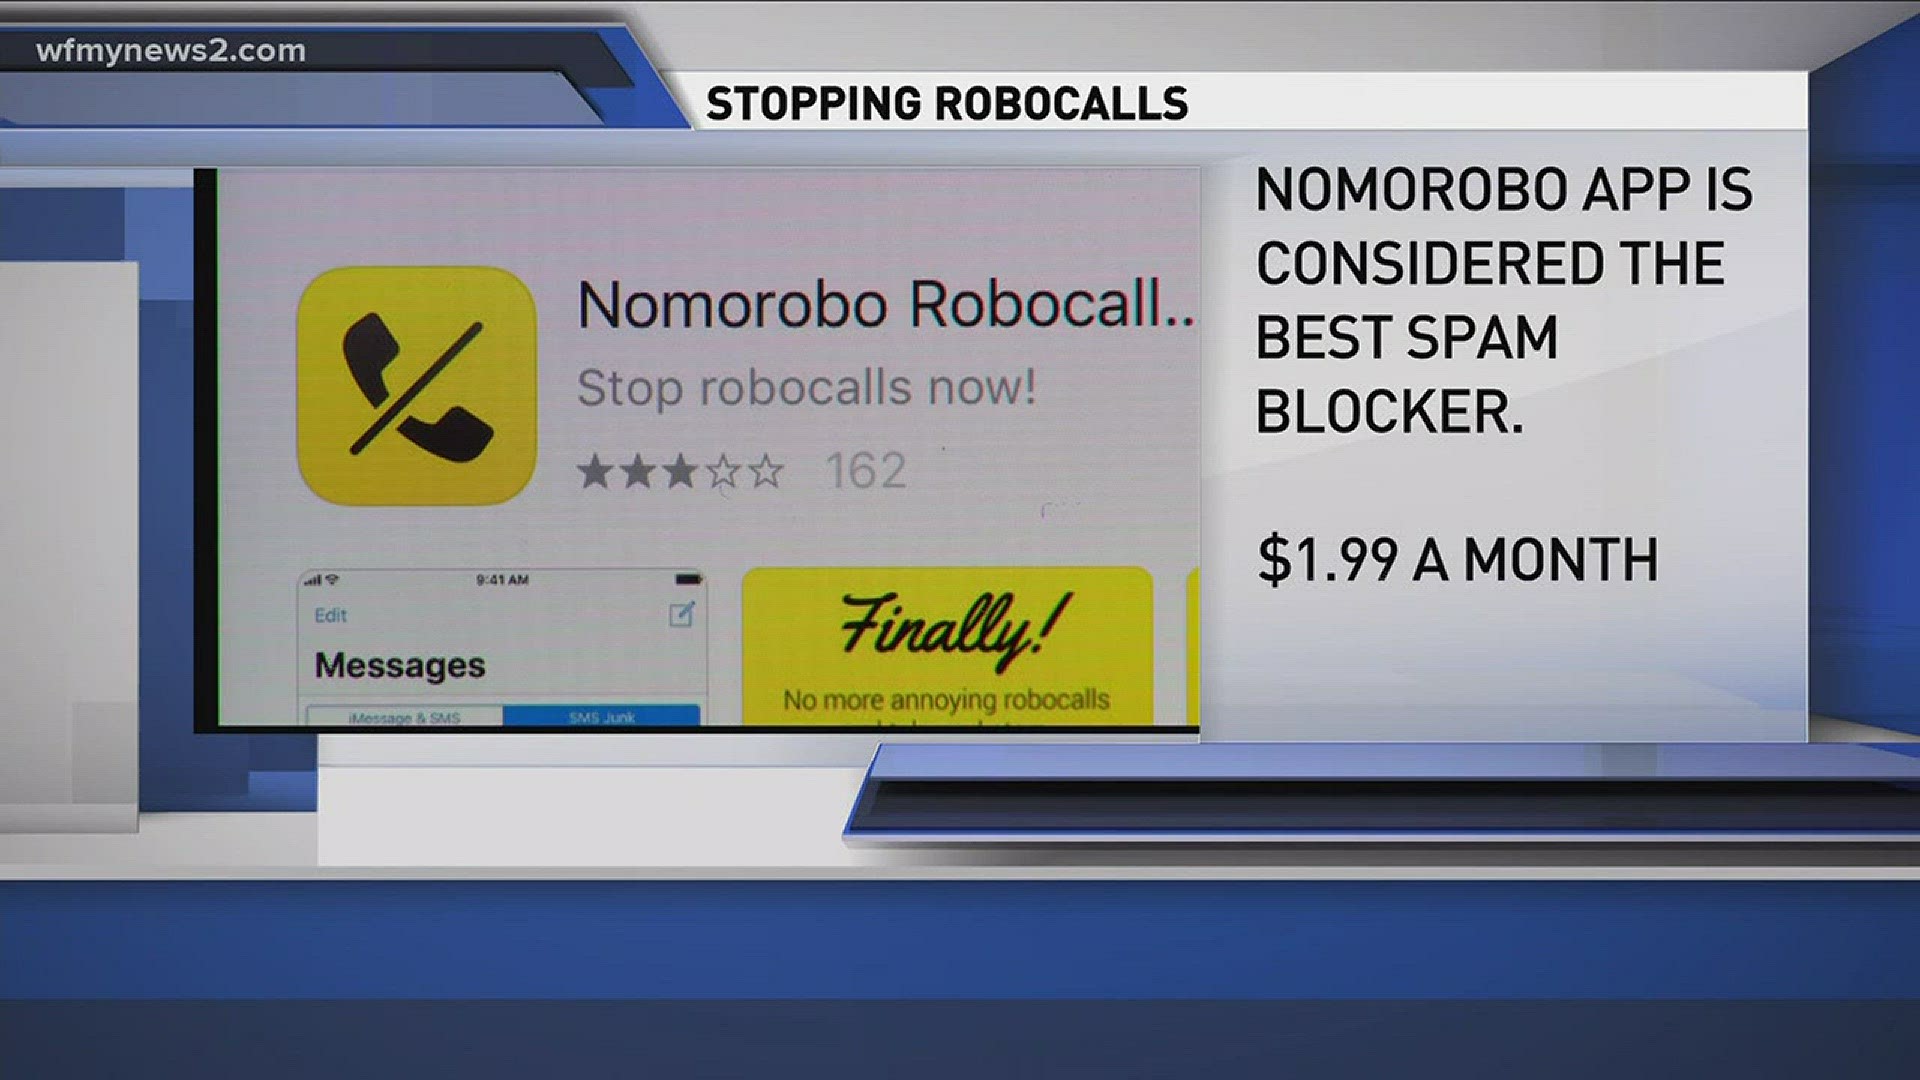 A panel discussion came up with a few ideas, including....jail time for those who make Robocalls.